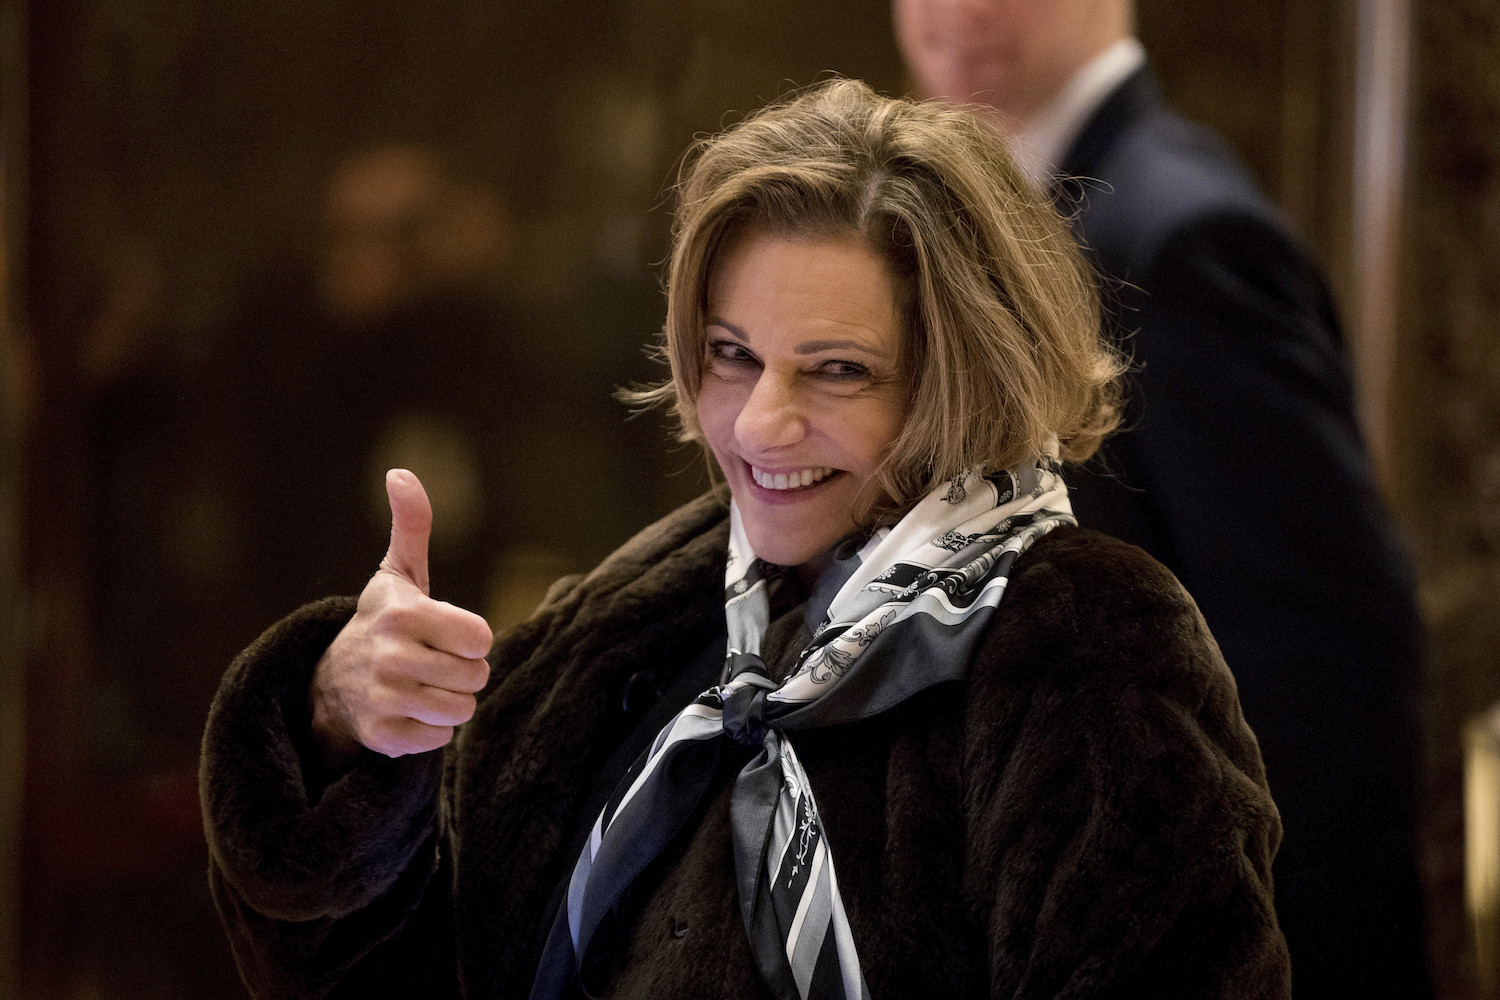 KT McFarland to stay on as deputy national security adviser: Report ...